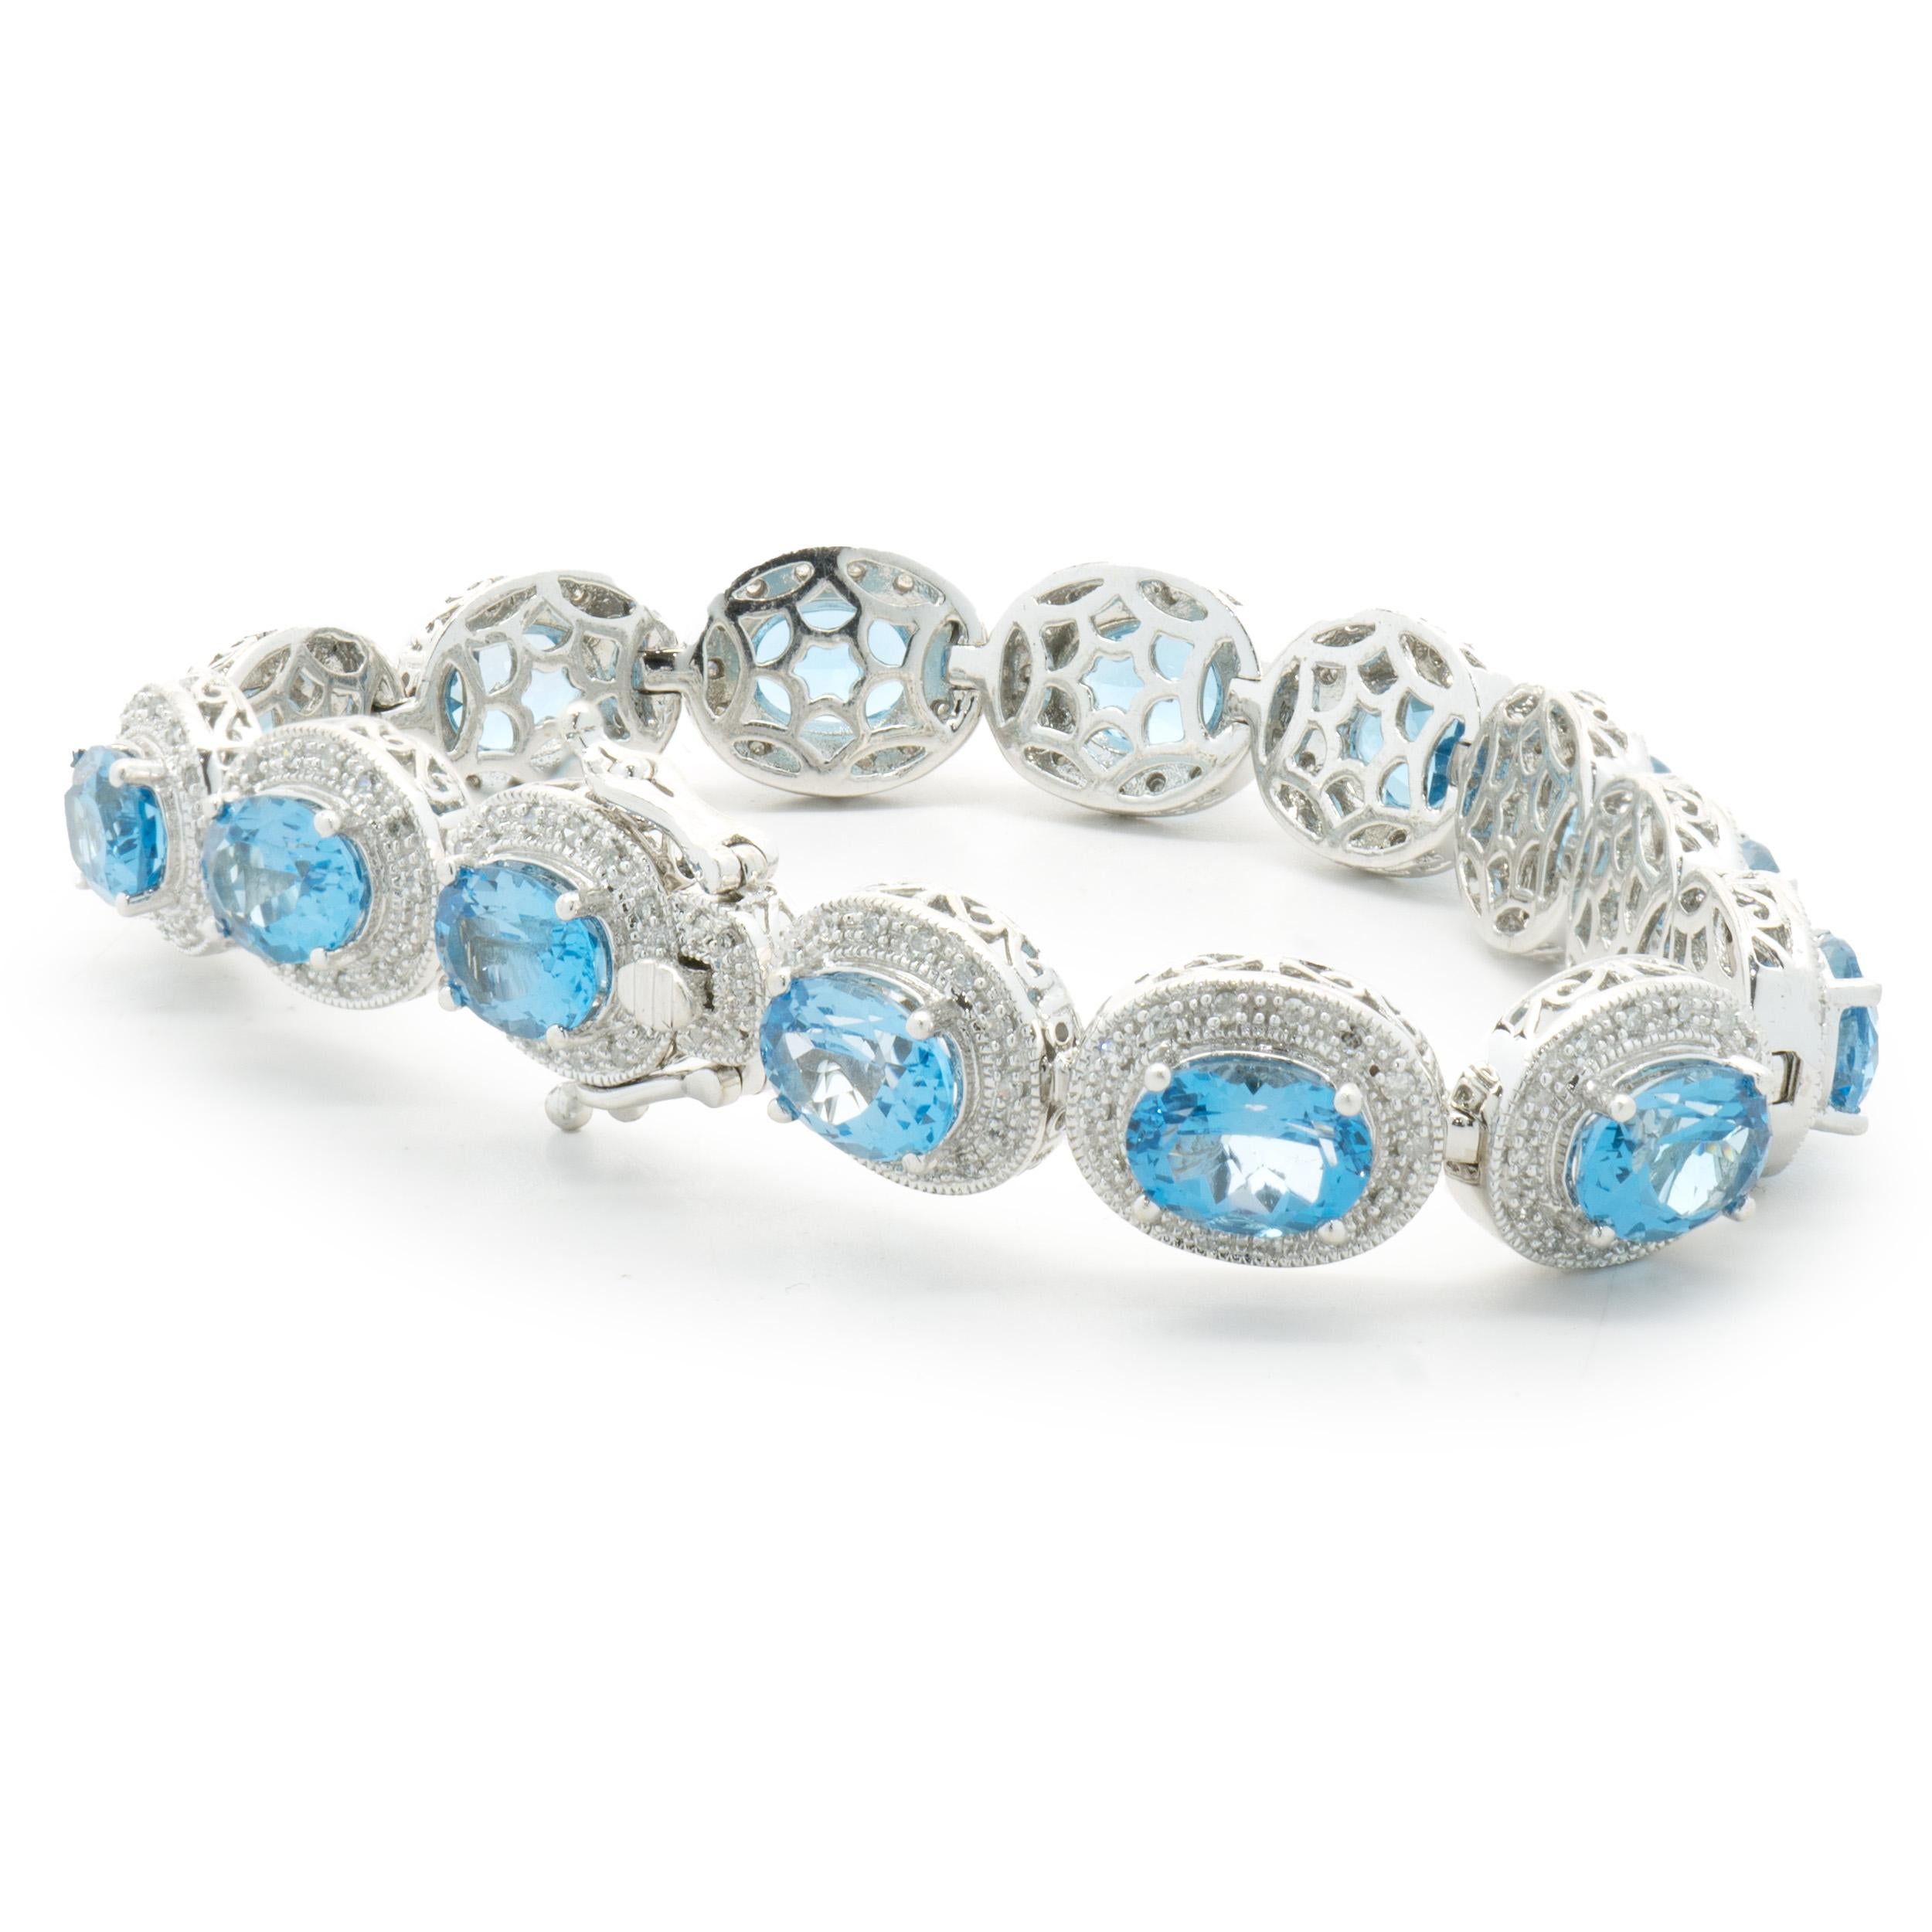 Designer: custom
Material: 14K white gold
Diamond: 201 round single cut = 1.00cttw
Color: H
Clarity: I1
Blue Topaz: 14 oval cut = 19.30cttw
Weight: 30.67 grams
Dimensions: bracelet will fit up to a 7-inch wrist